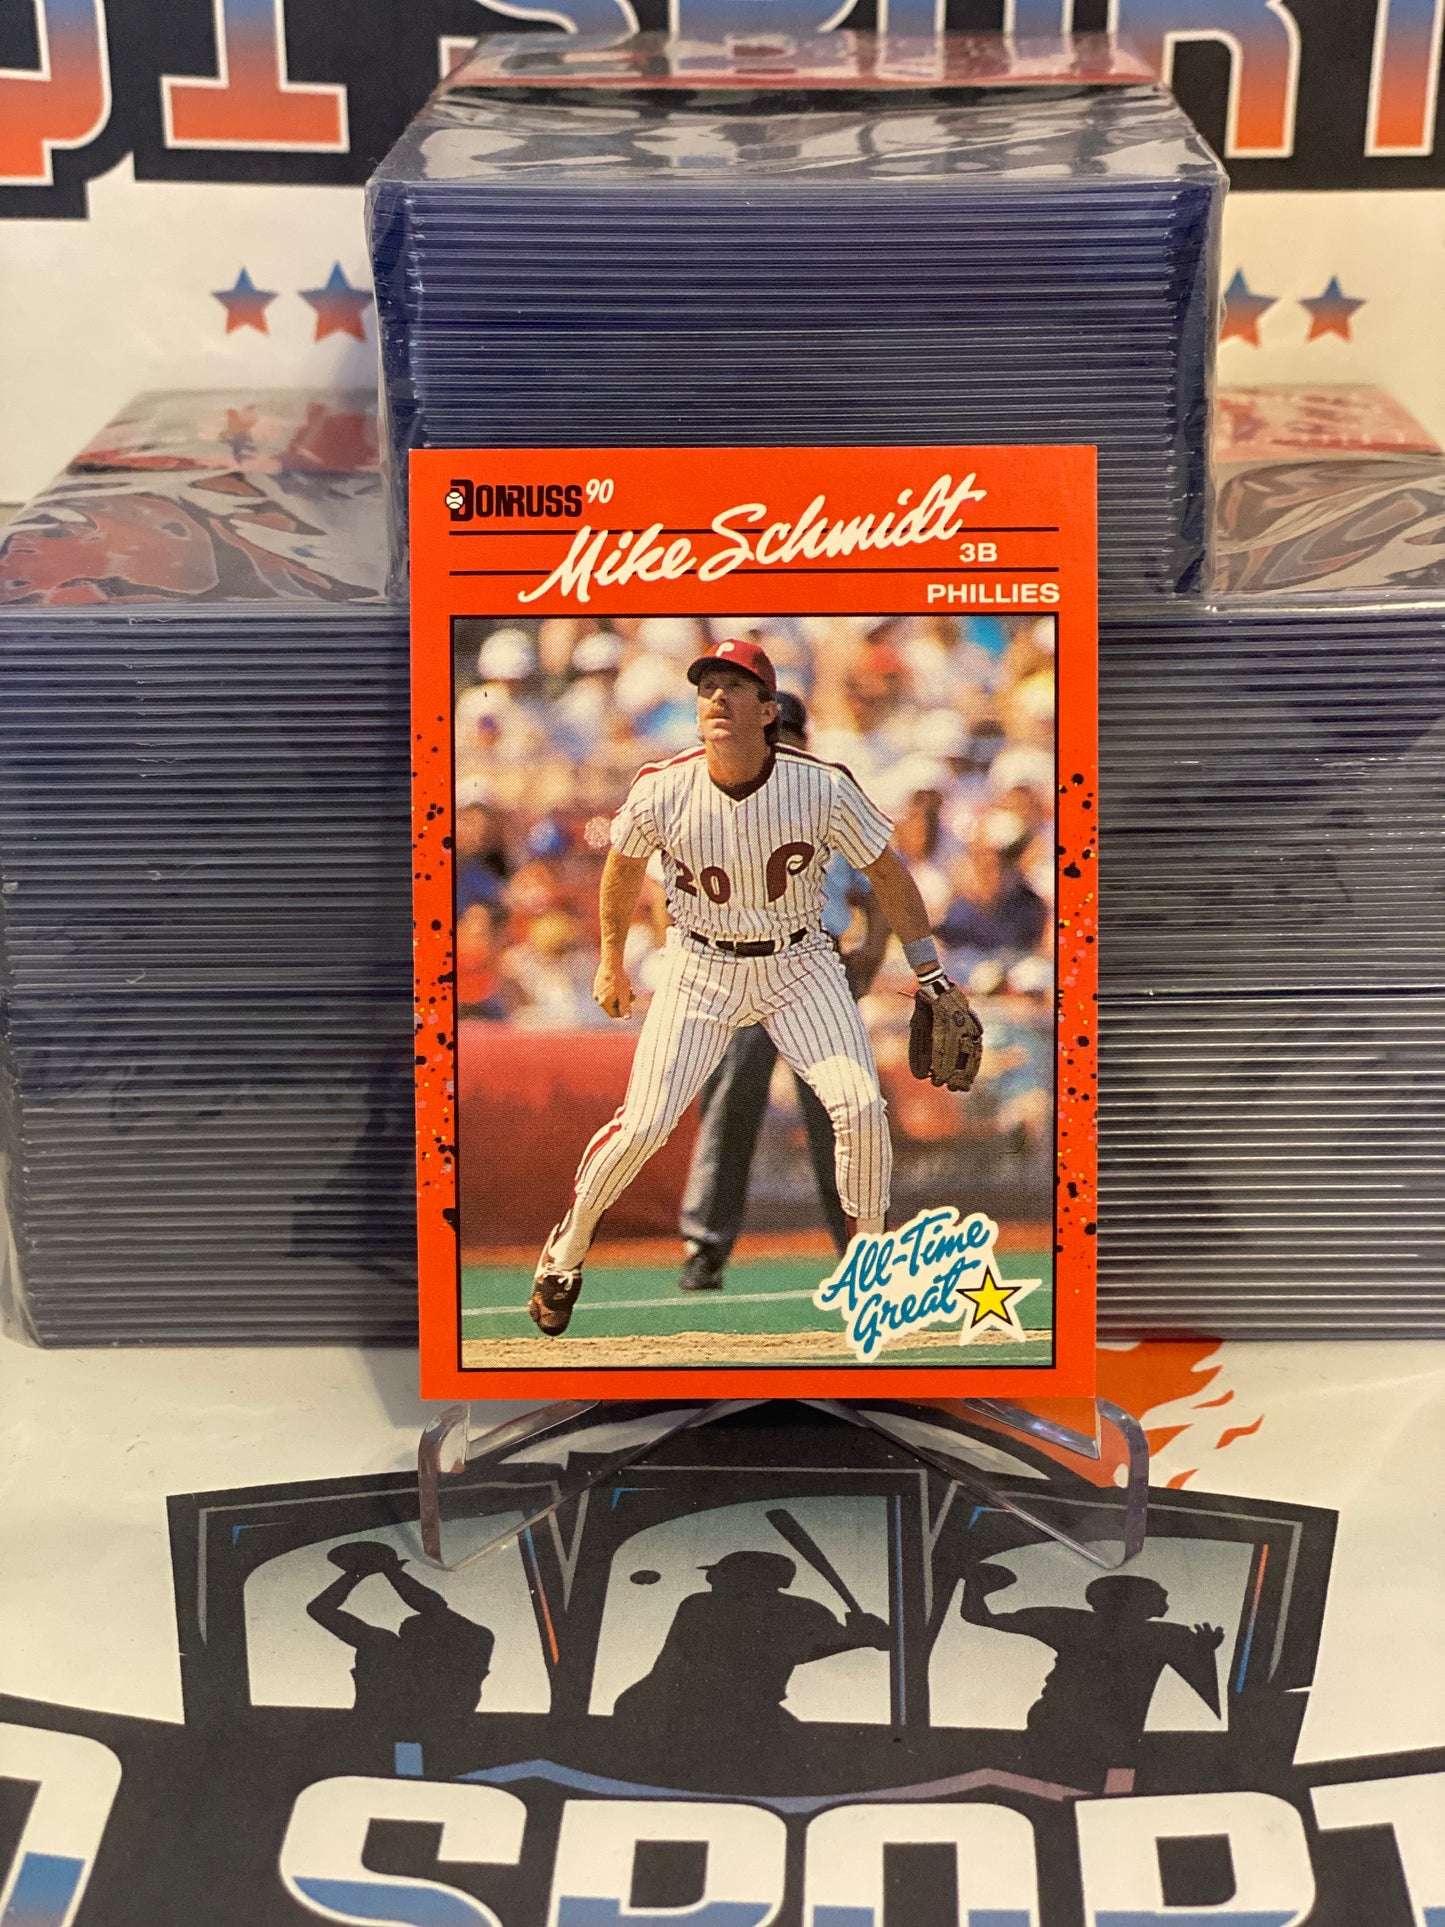 1990 Donruss (All-Time Great) Mike Schmidt #643